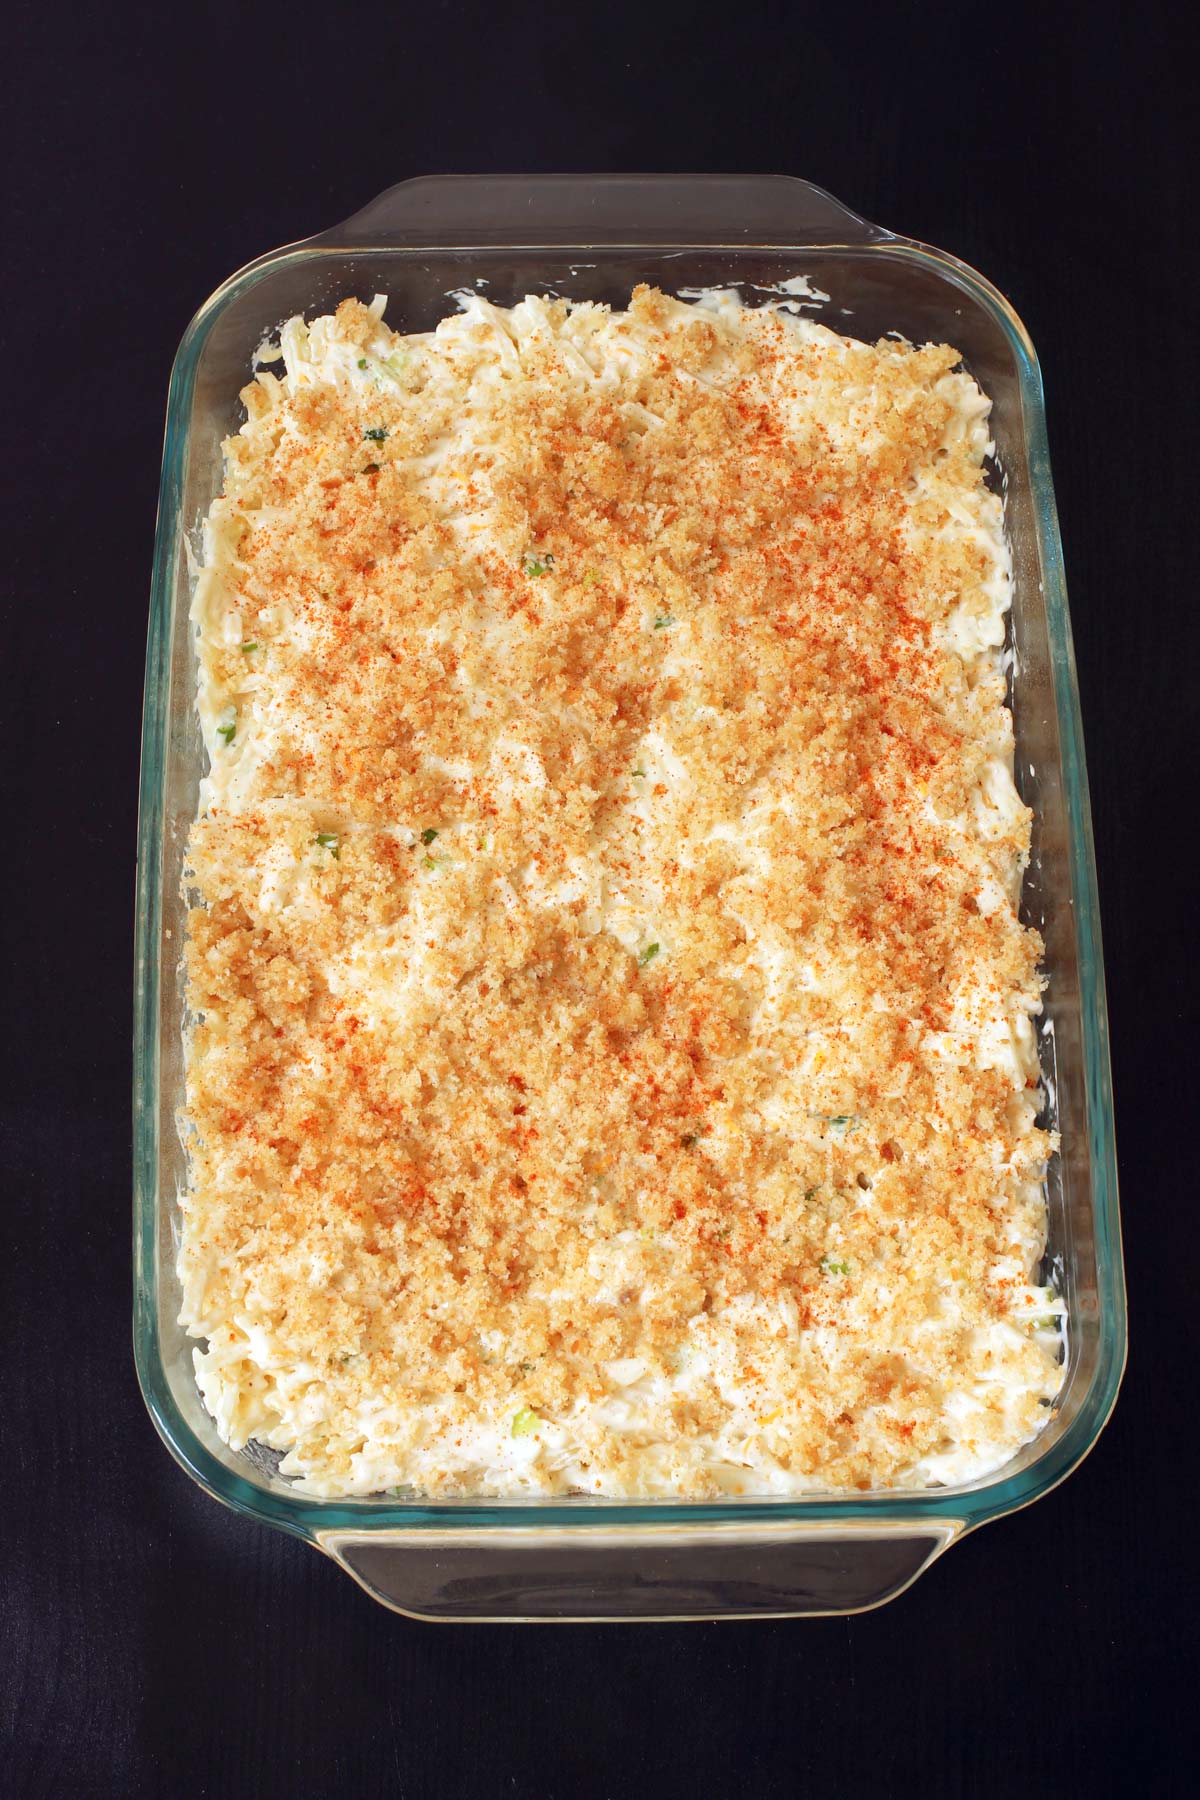 buttered bread crumbs sprinkled atop the casserole.